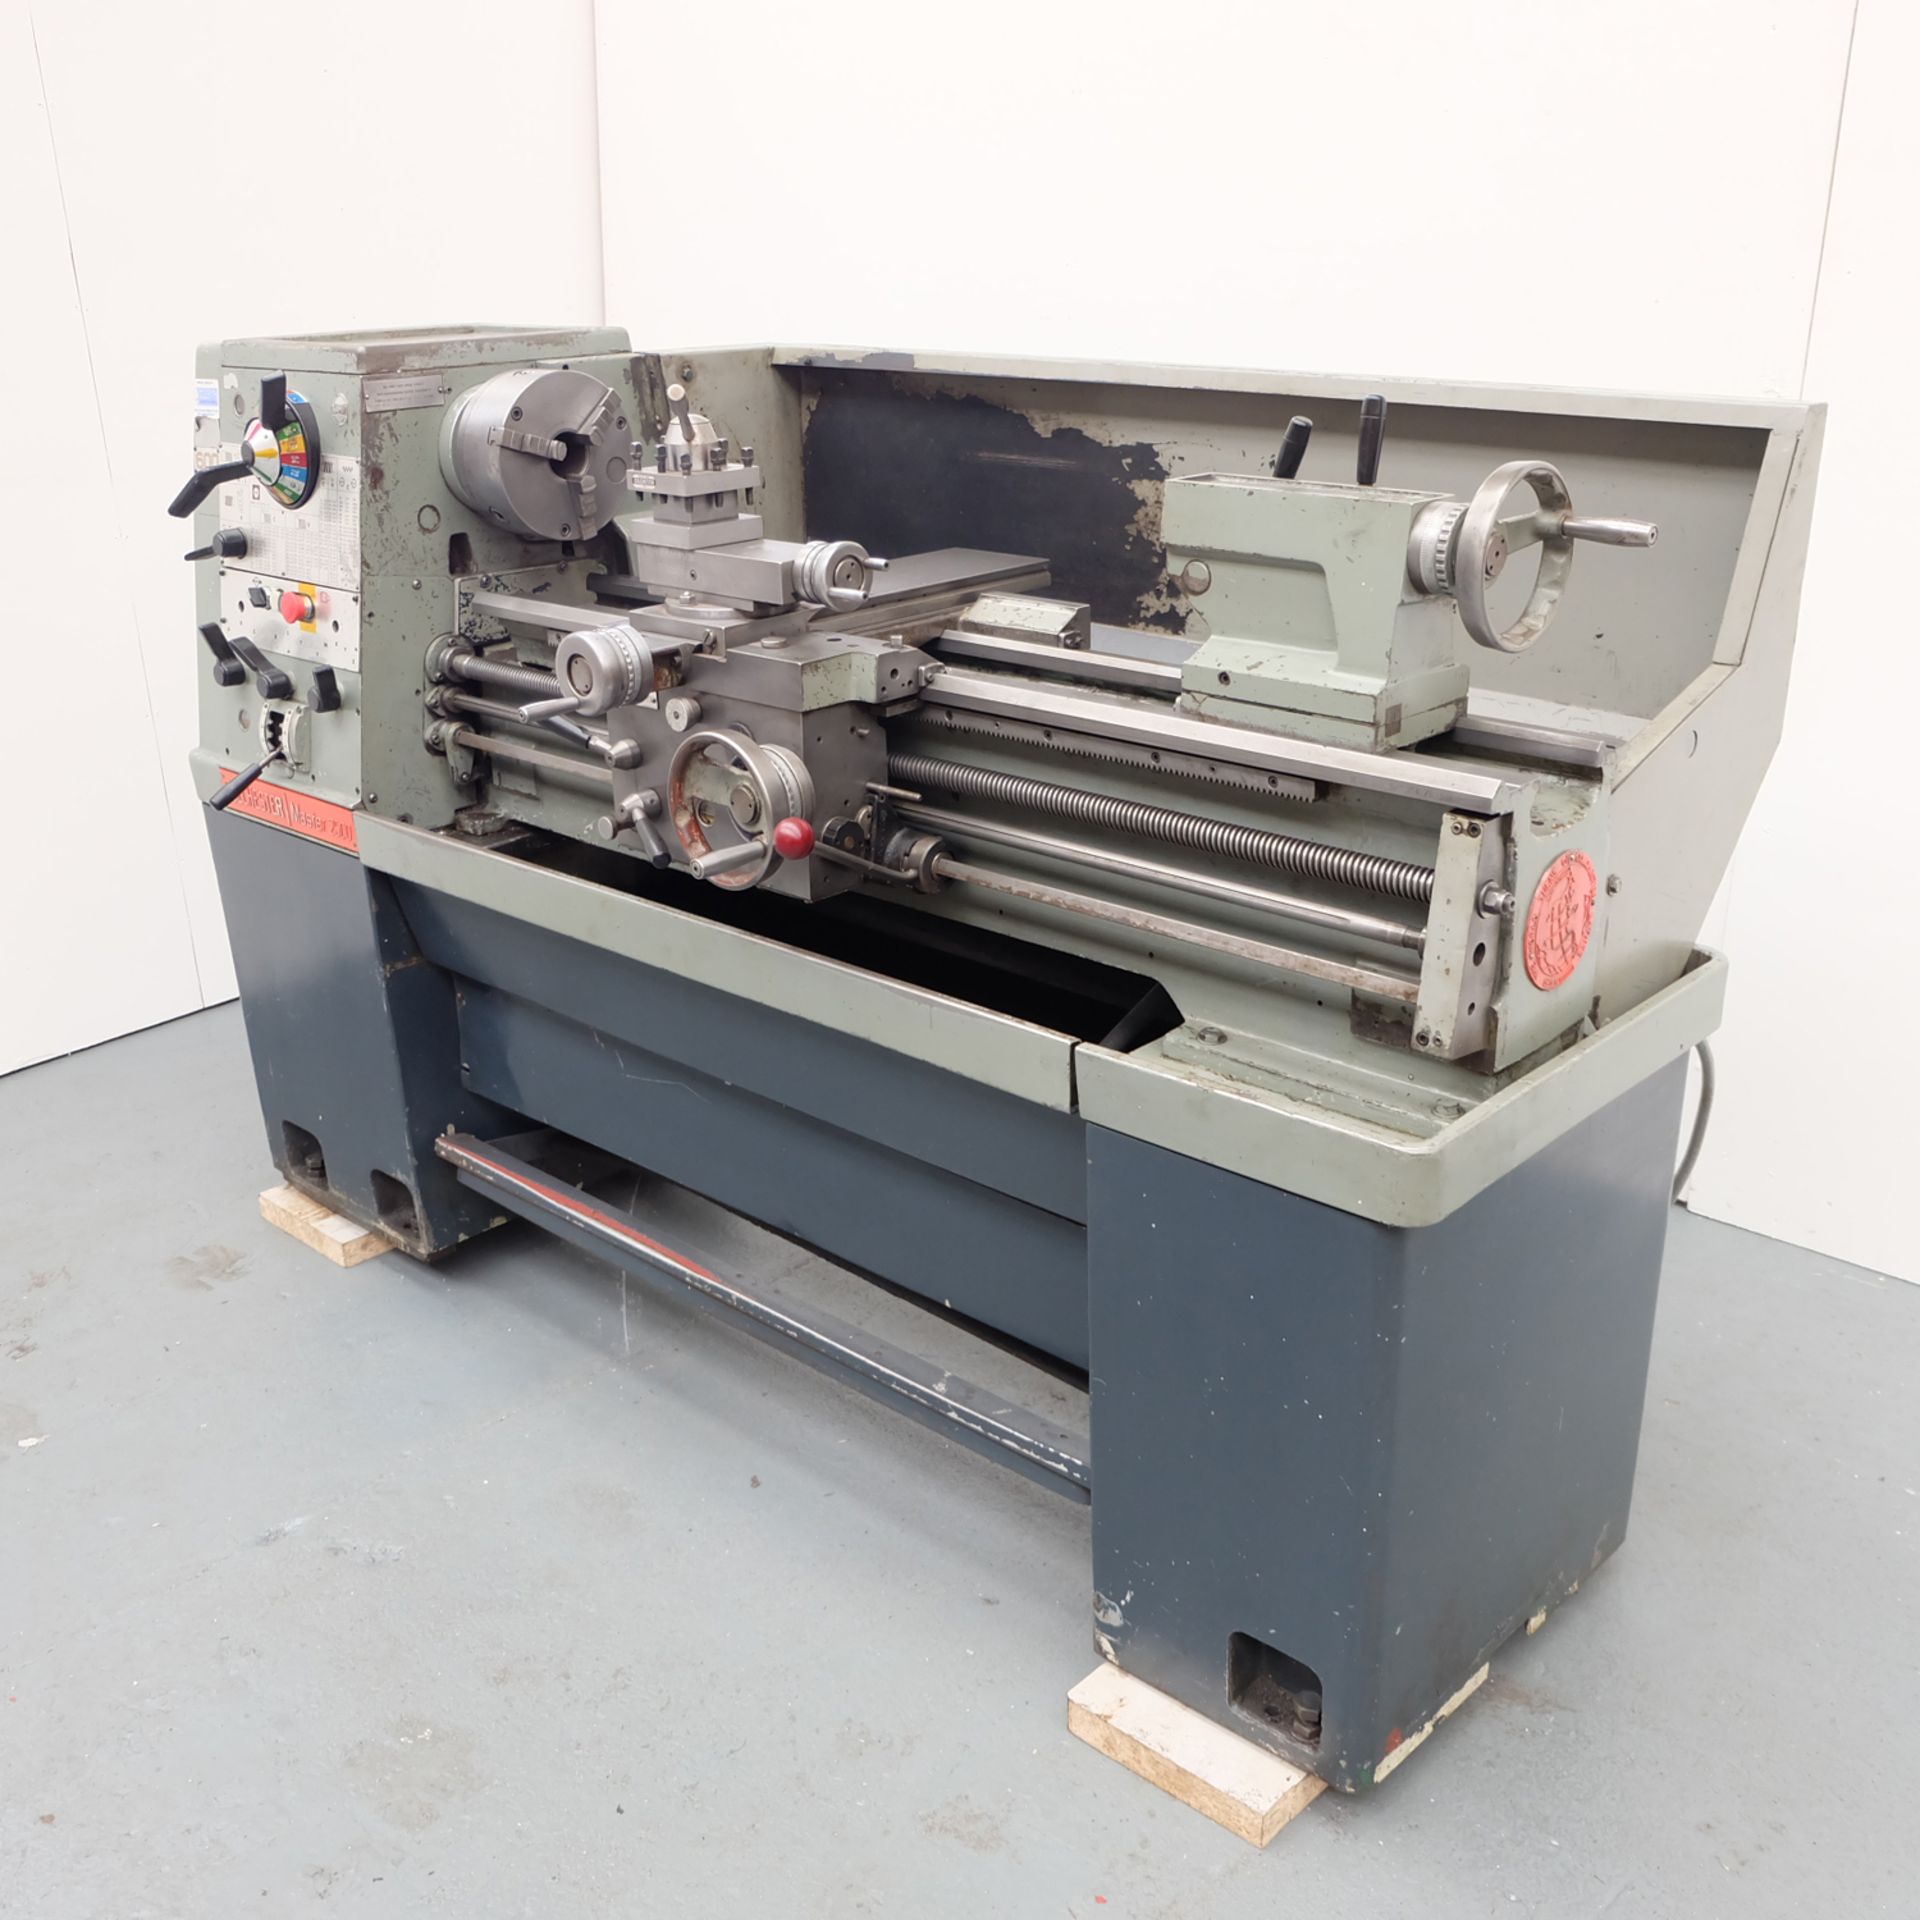 Colchester Master 2500 Gap Bed Centre Lathe. Height of Centres 6 1/2". Swing Over Bed 13 1/4". - Image 2 of 10